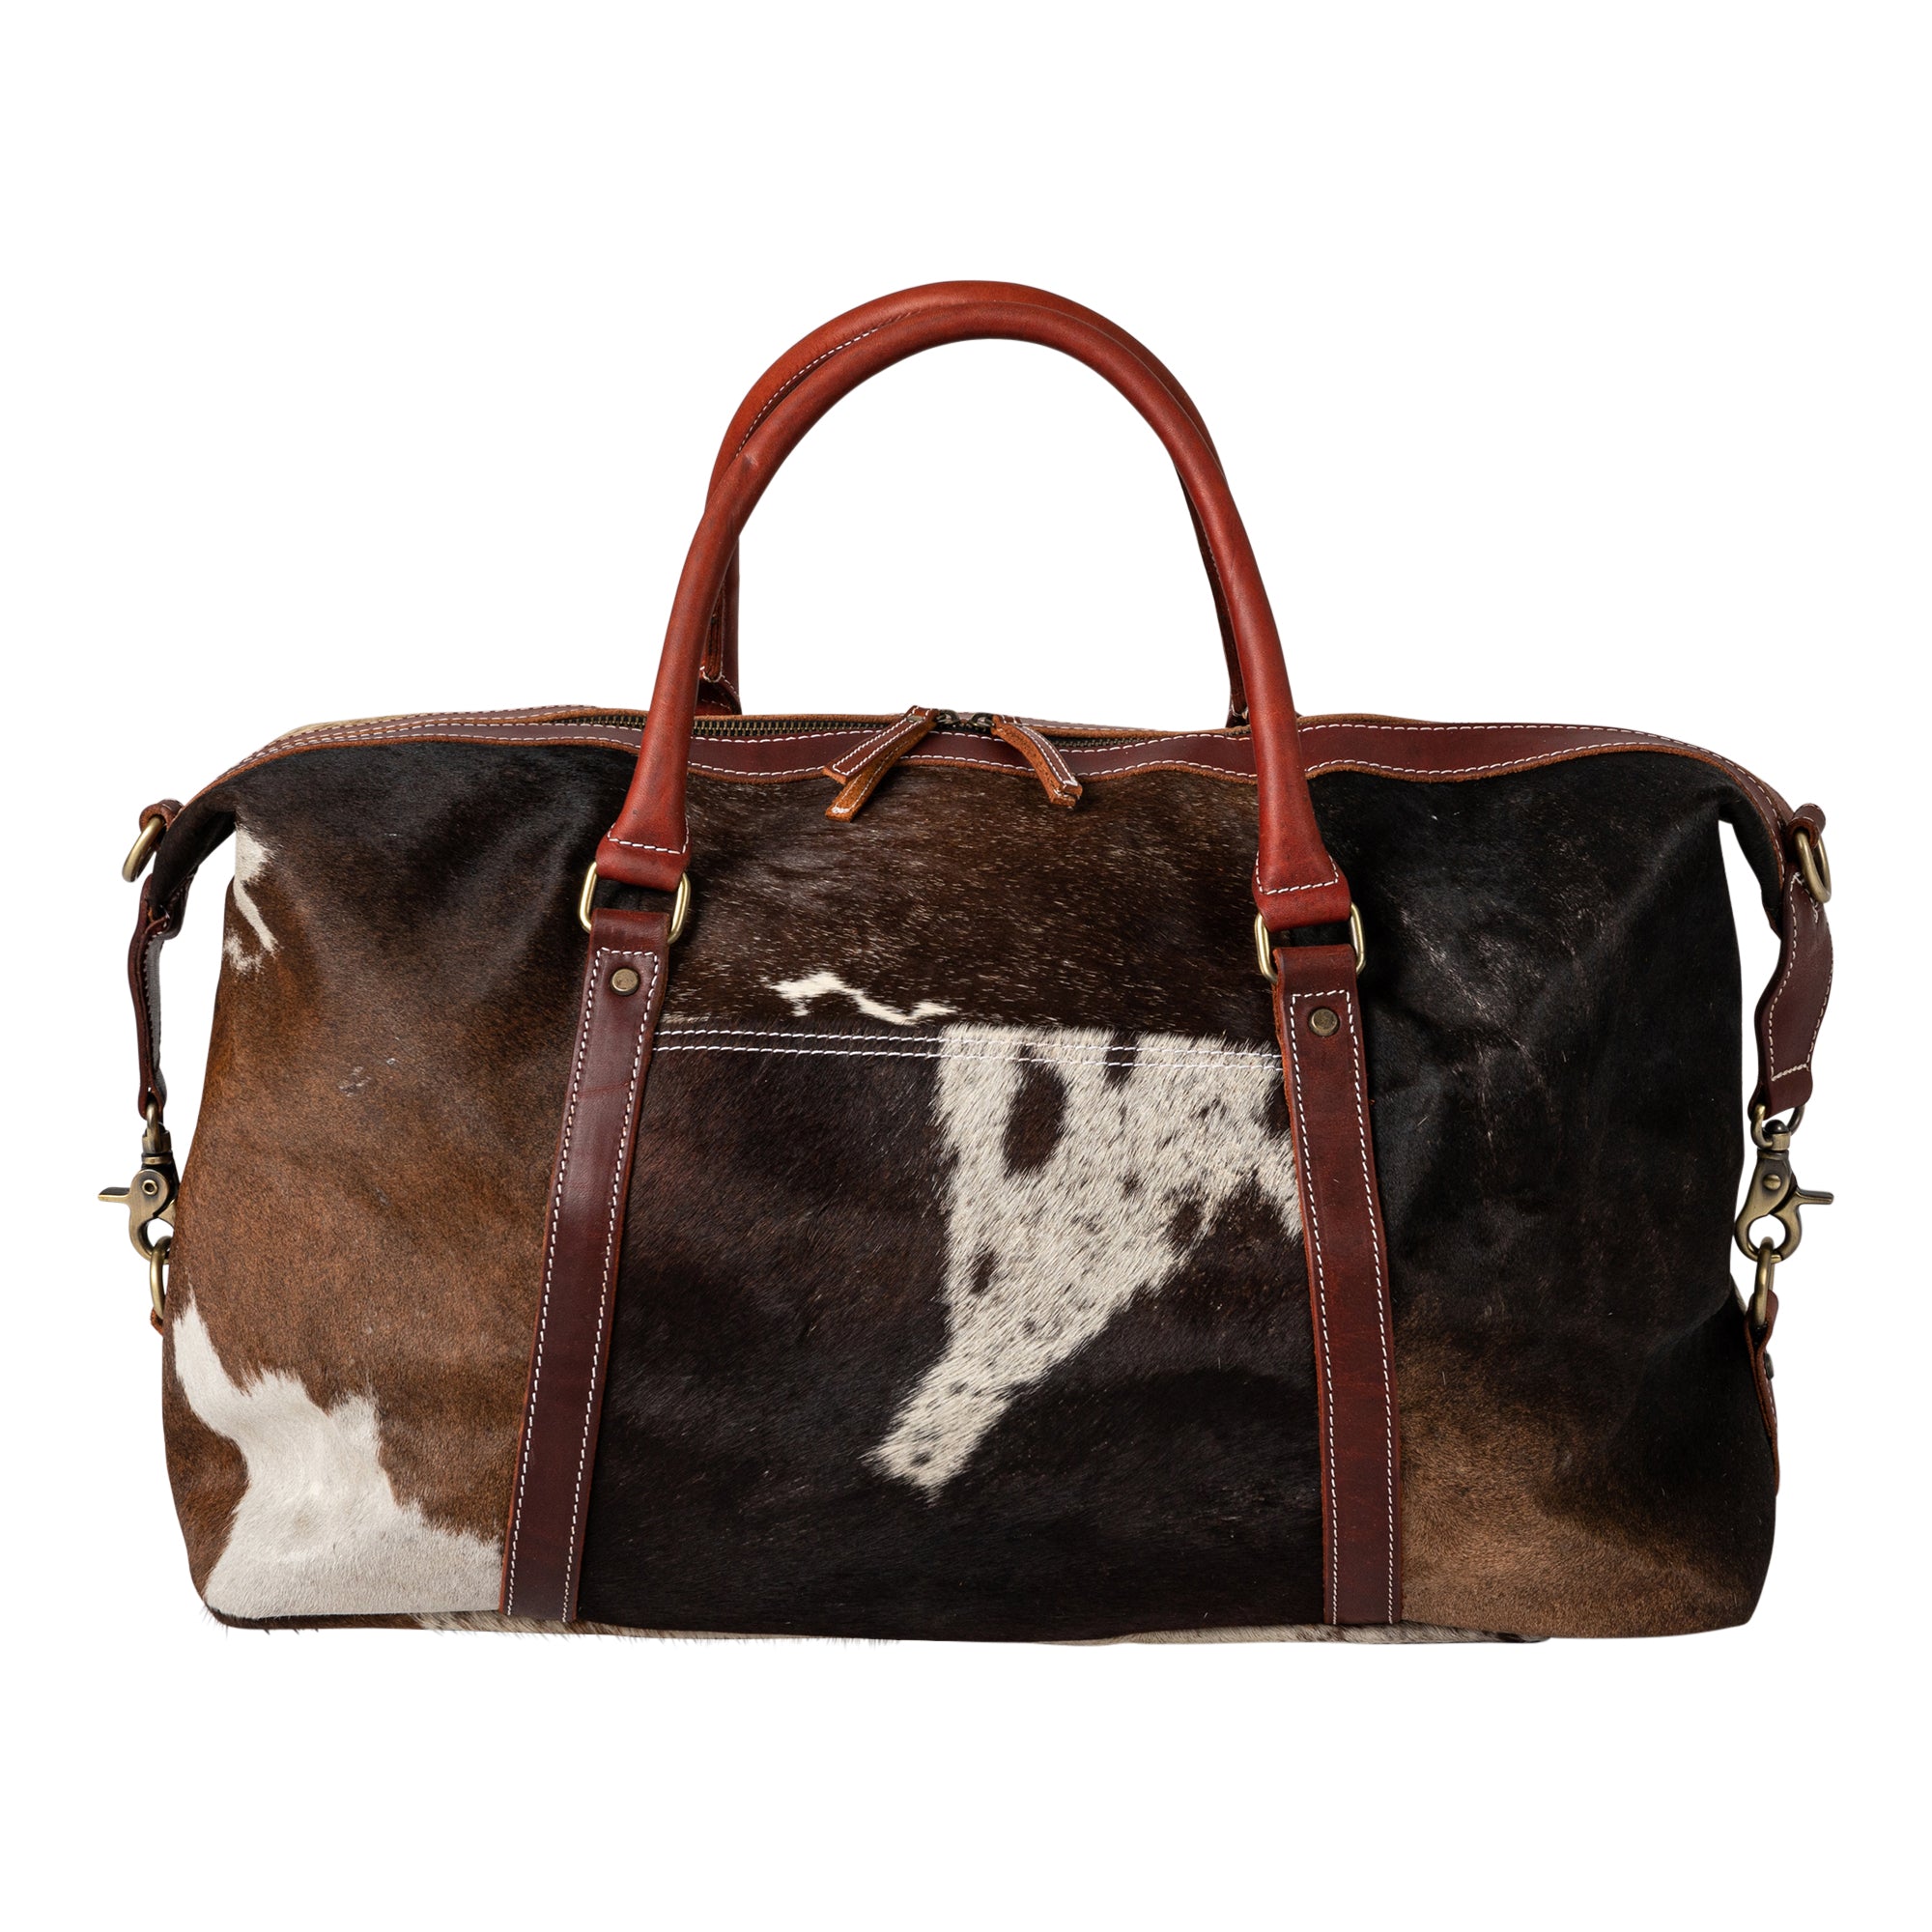 Men Cowhide Best Quality Leather Vintage Duffel Luggage Gym Overnight Travel  Bag